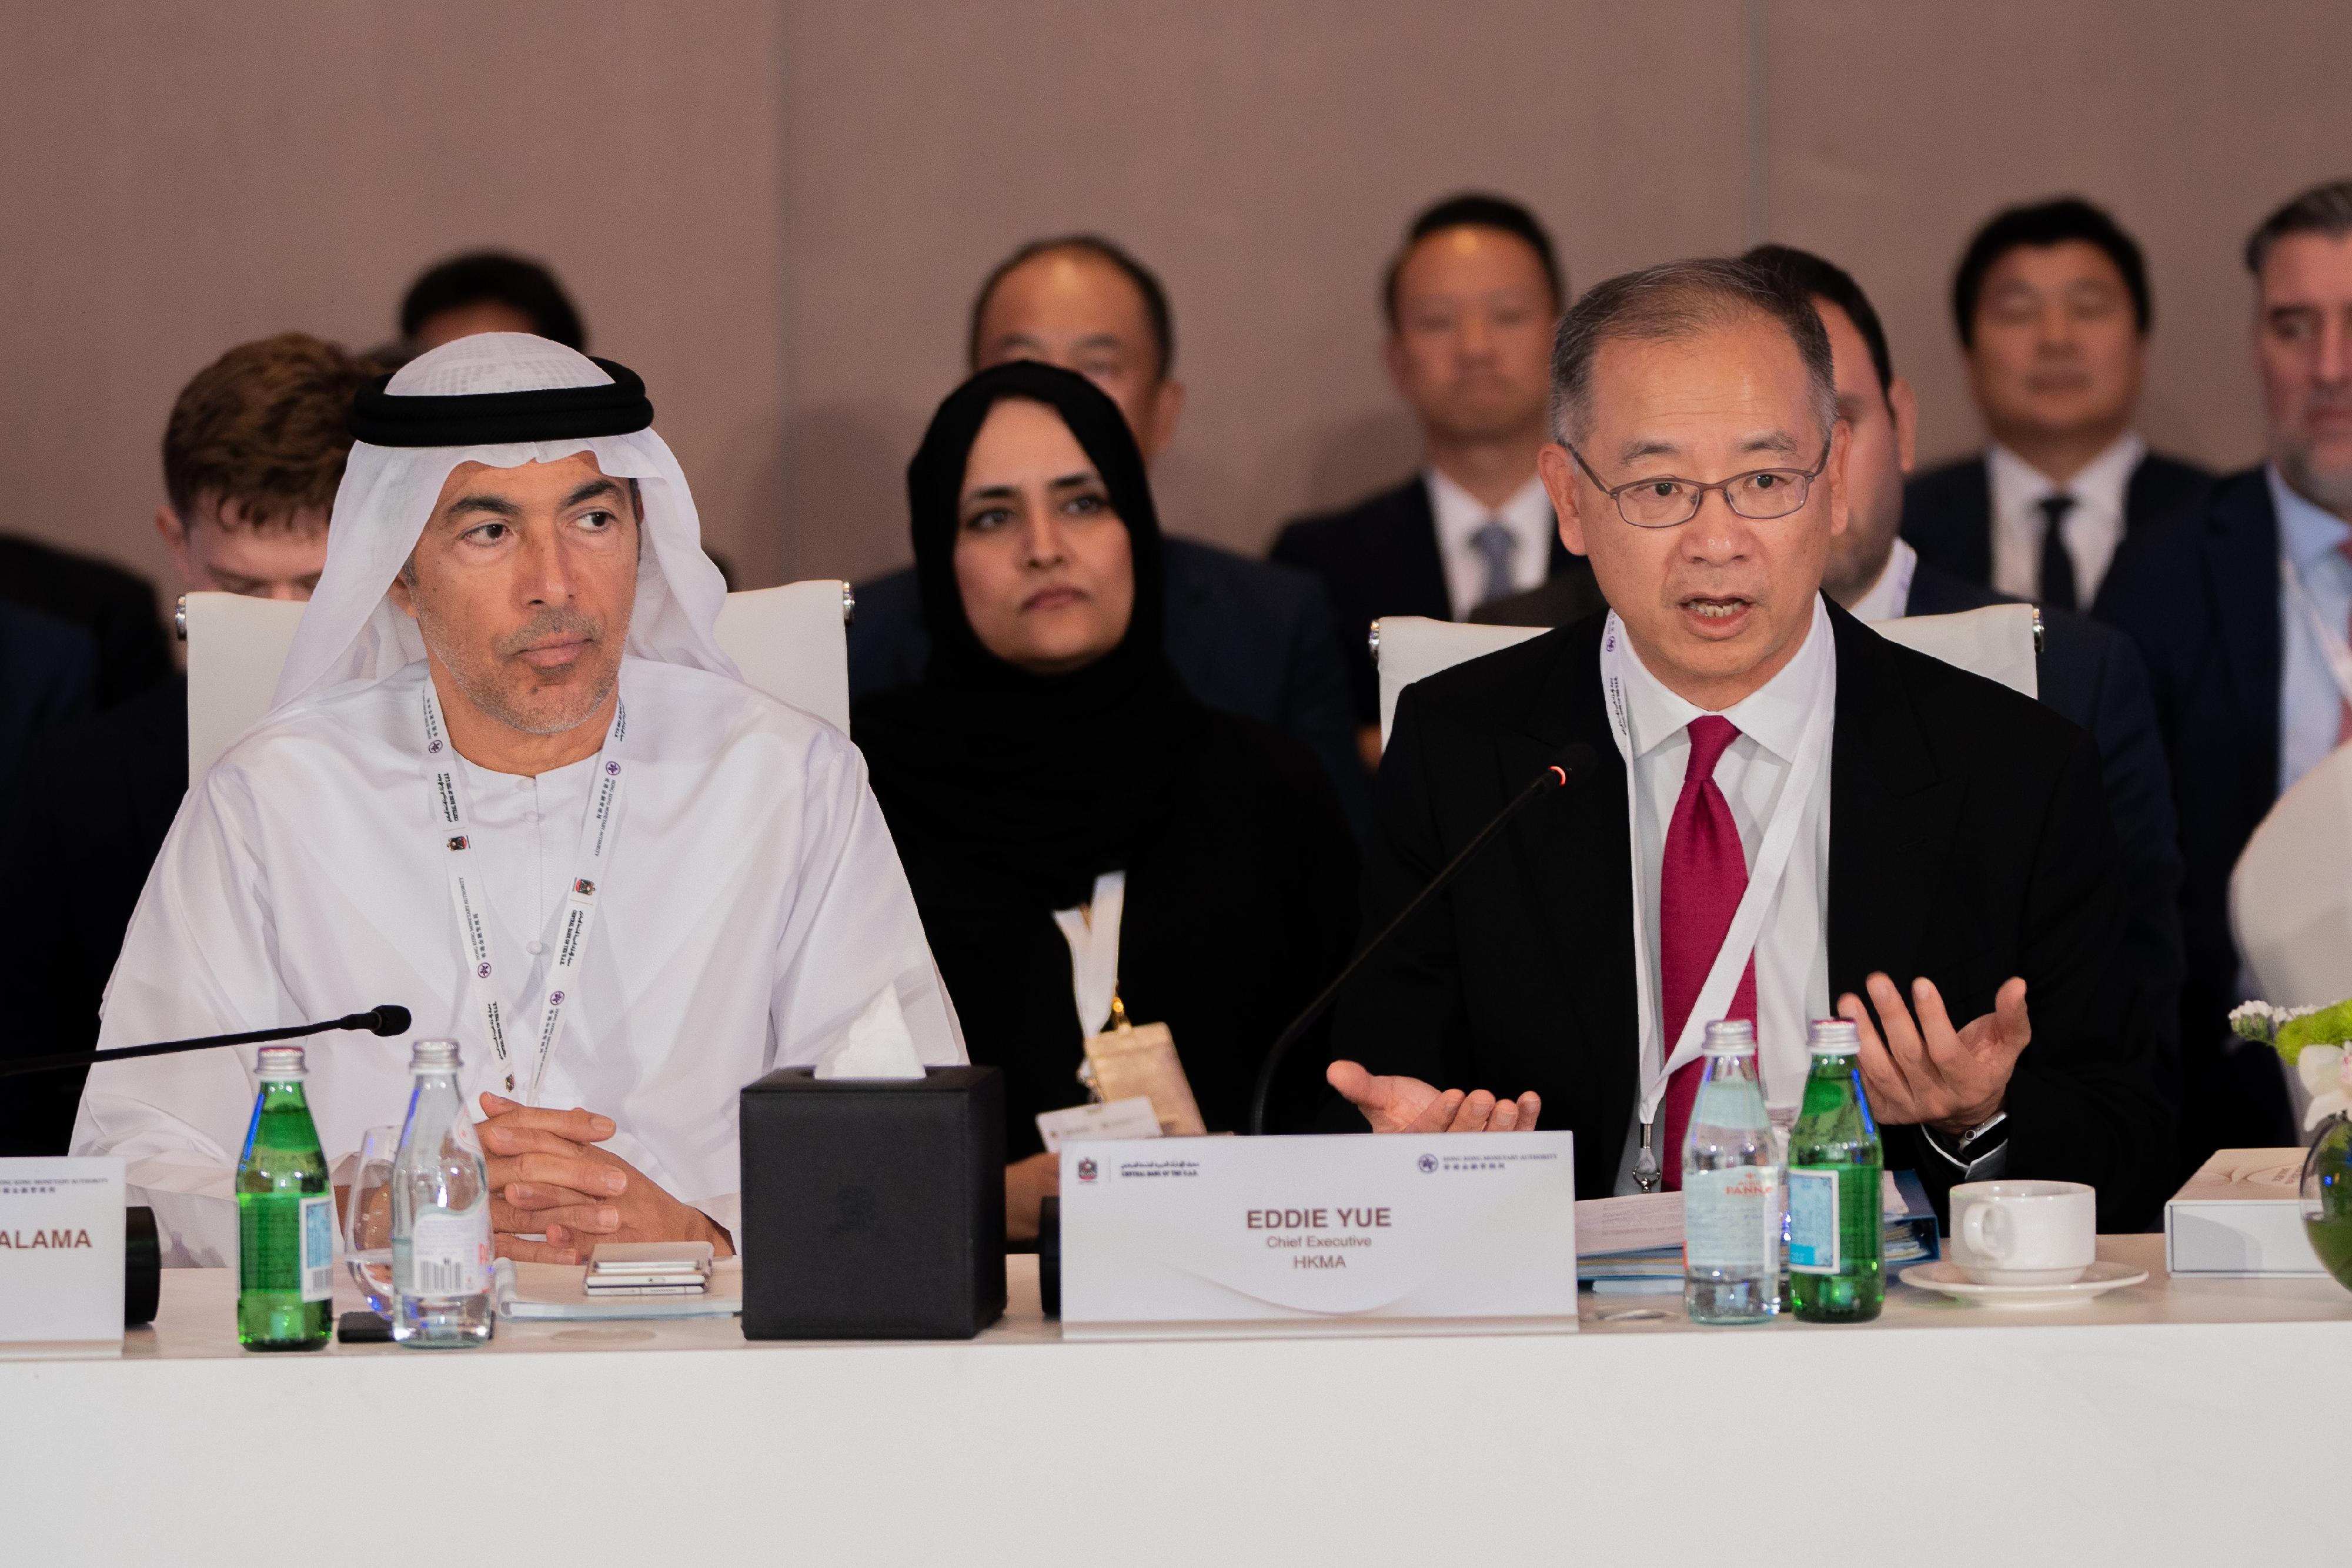 The Chief Executive of the Hong Kong Monetary Authority, Mr Eddie Yue (front row, right), met with the Governor of the Central Bank of the United Arab Emirates, H.E. Khaled Mohamed Balama (front row, left) on May 29 (Abu Dhabi time).